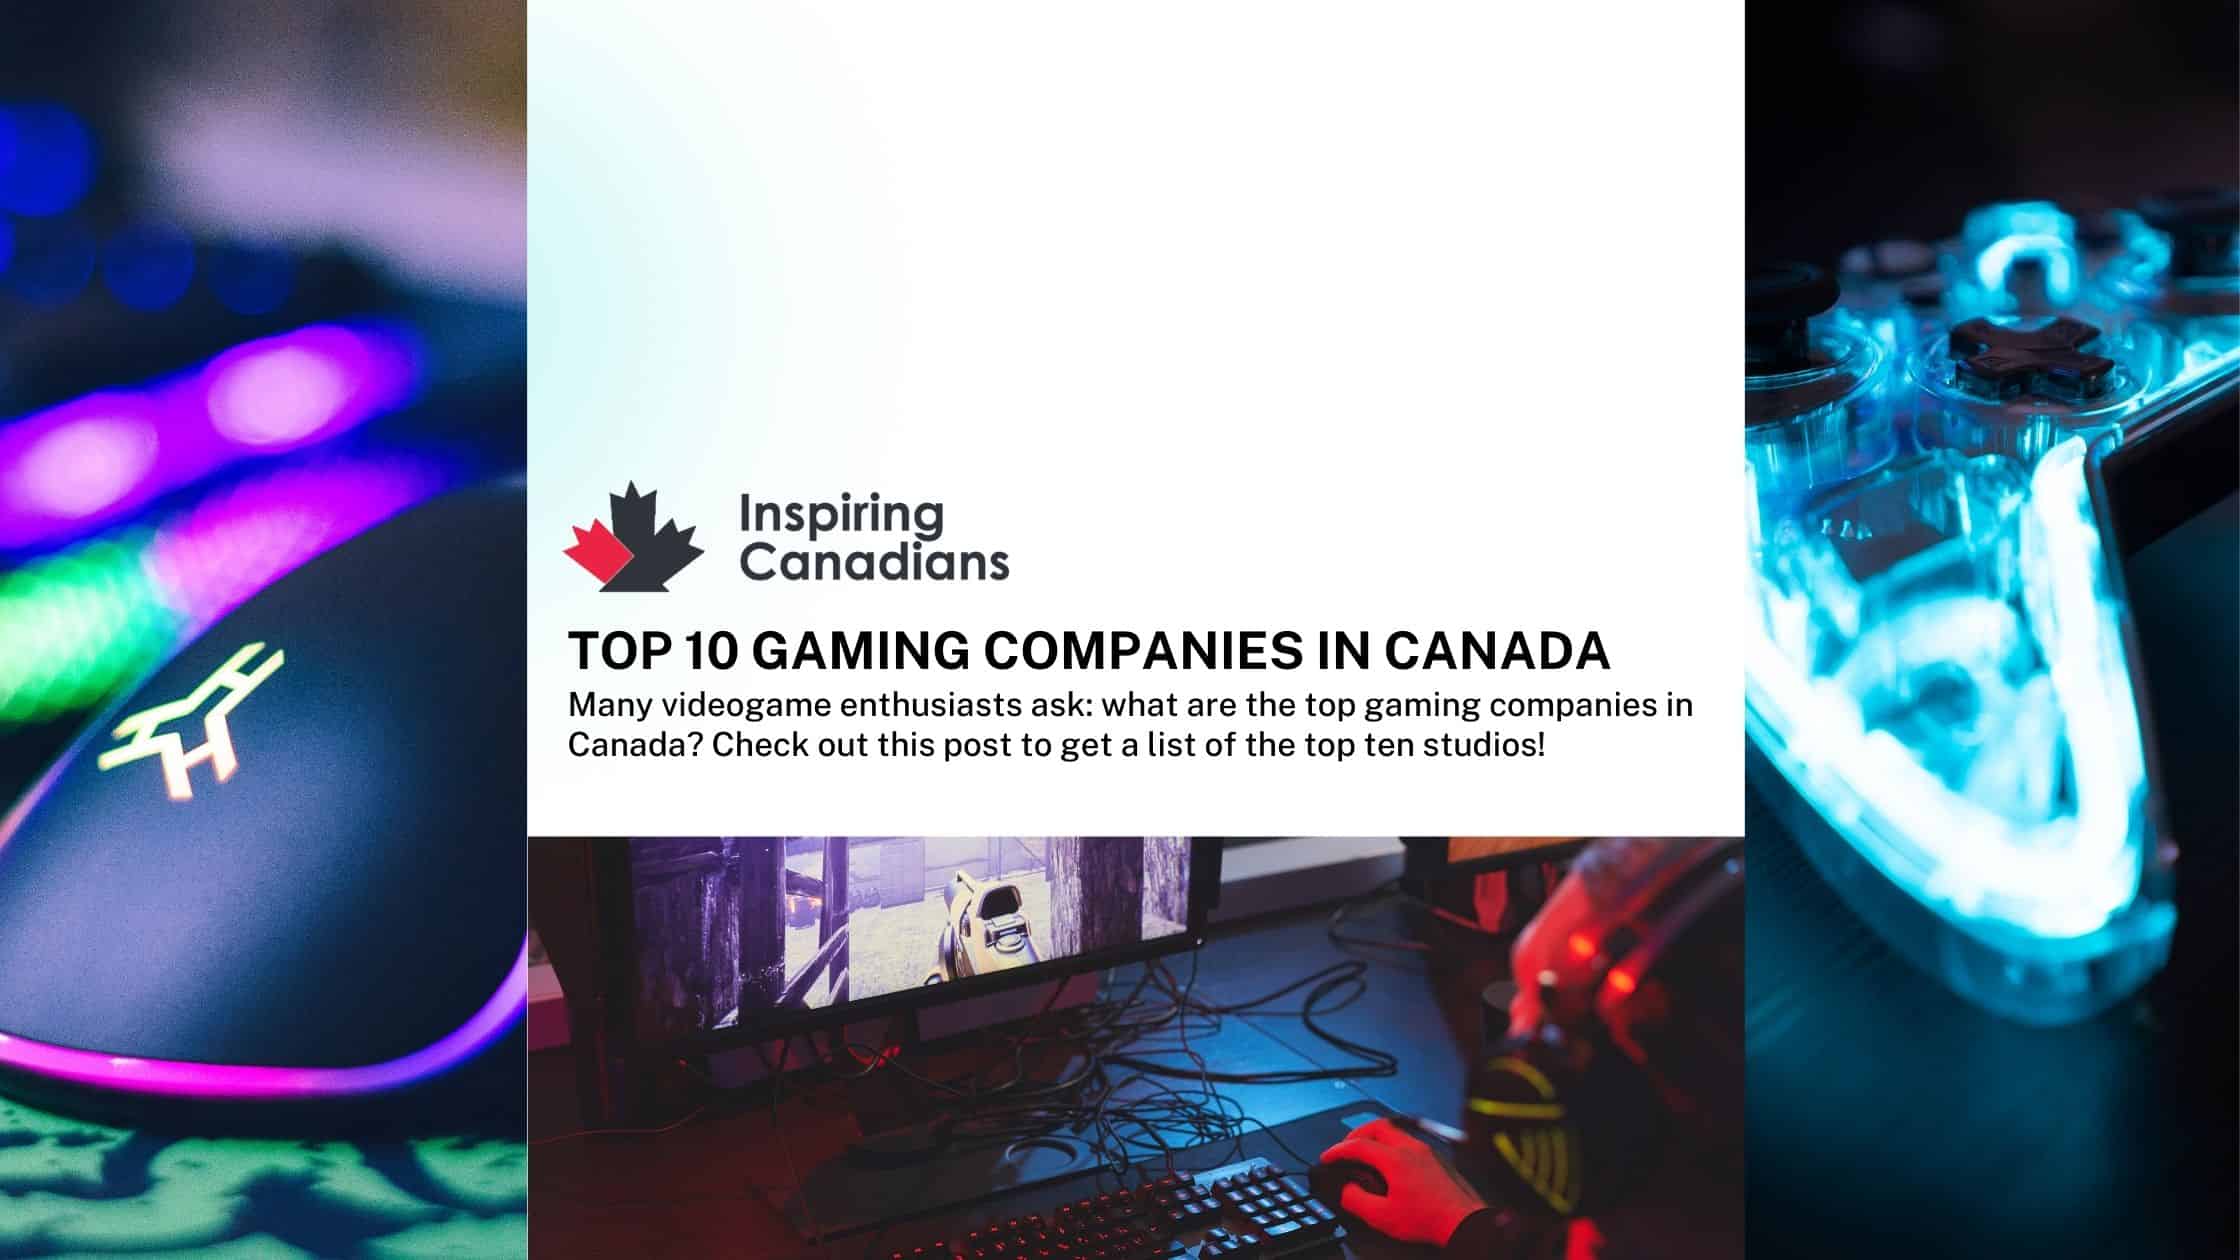 Top 10 gaming companies in Canada